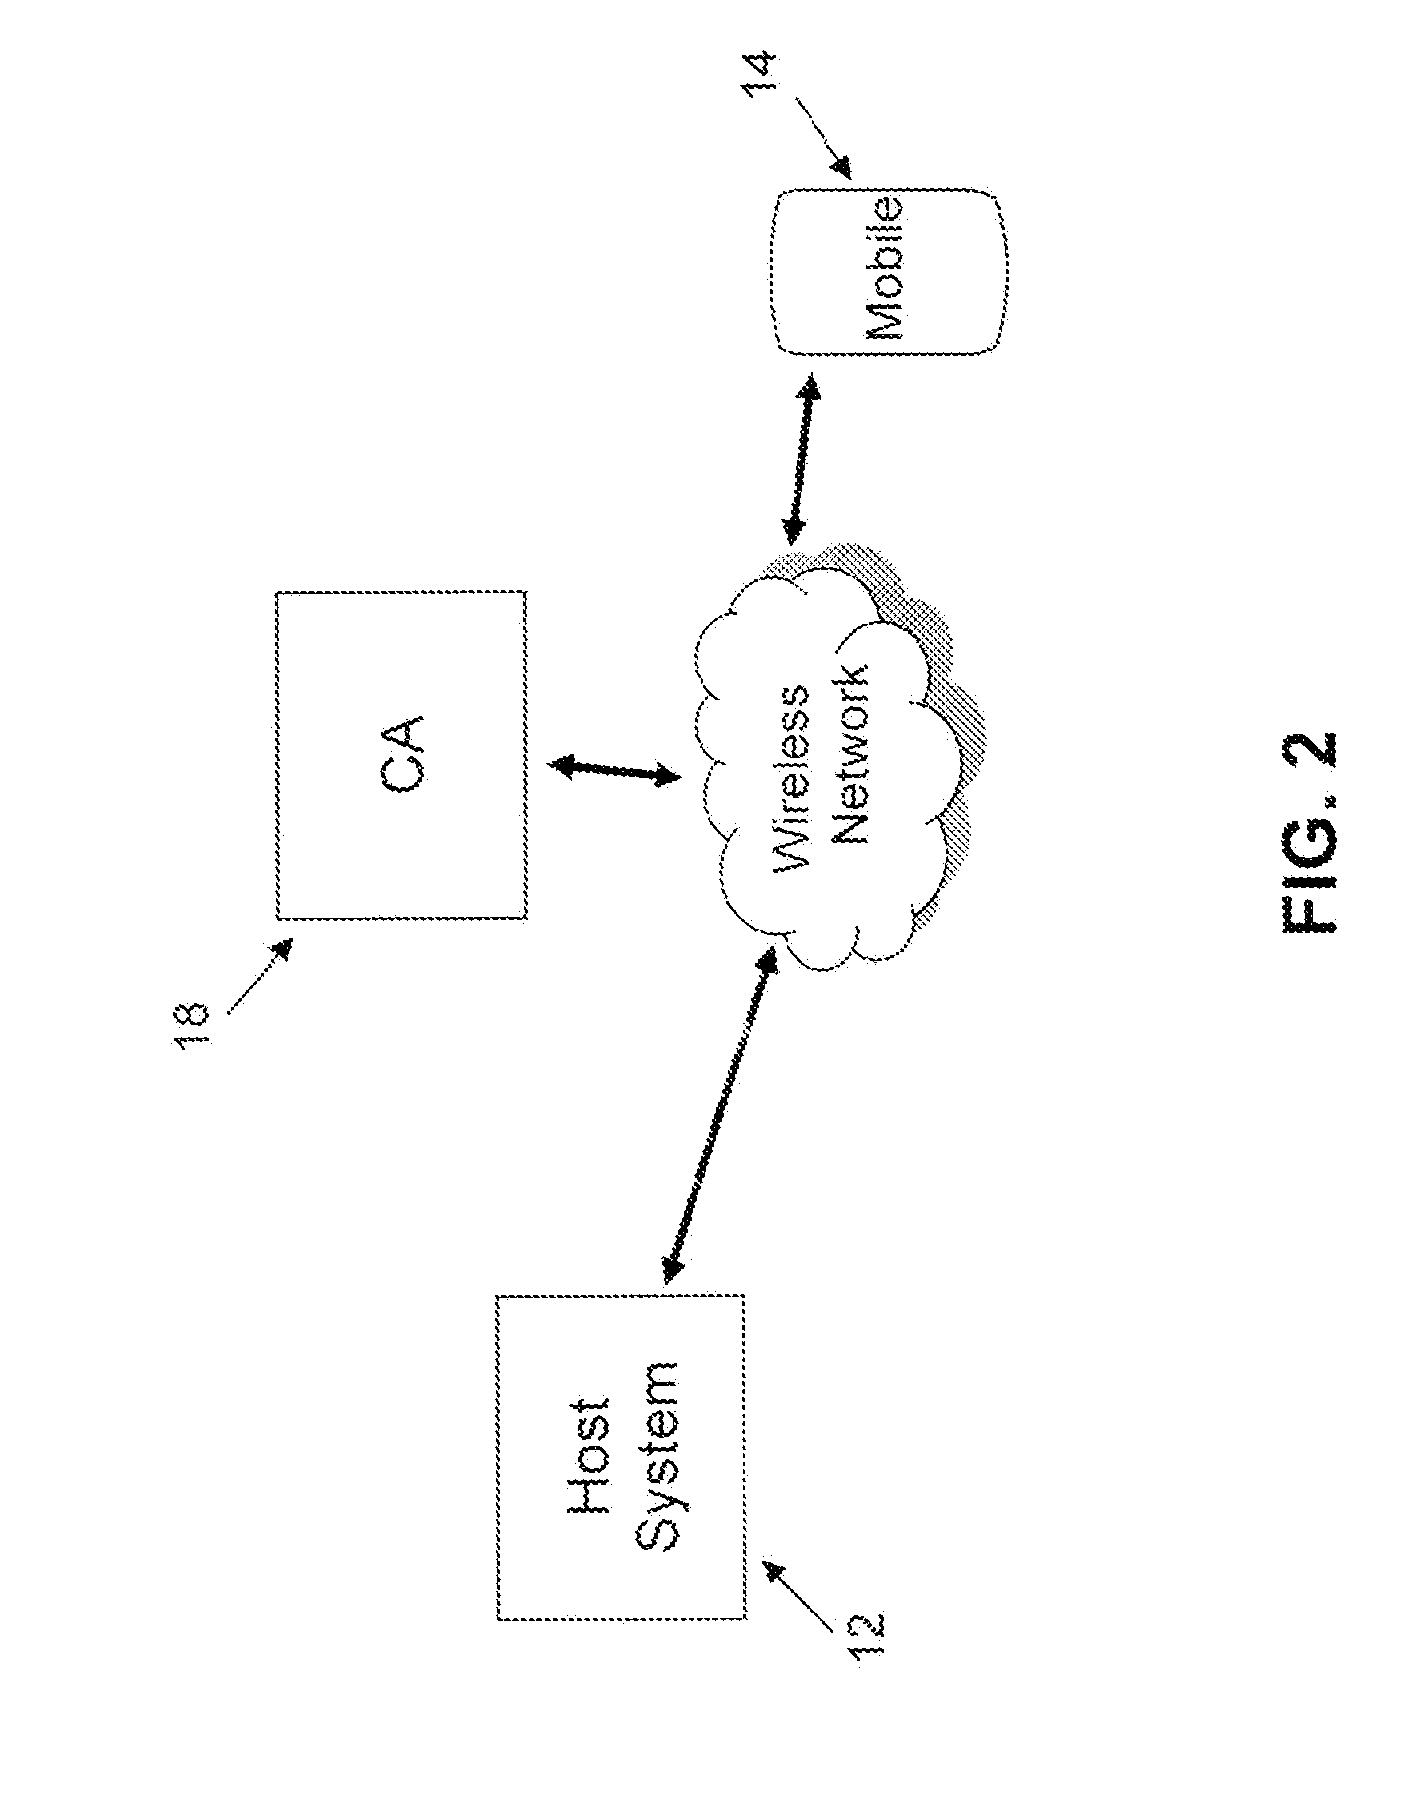 System and method for reducing computations in an implicit certificate scheme